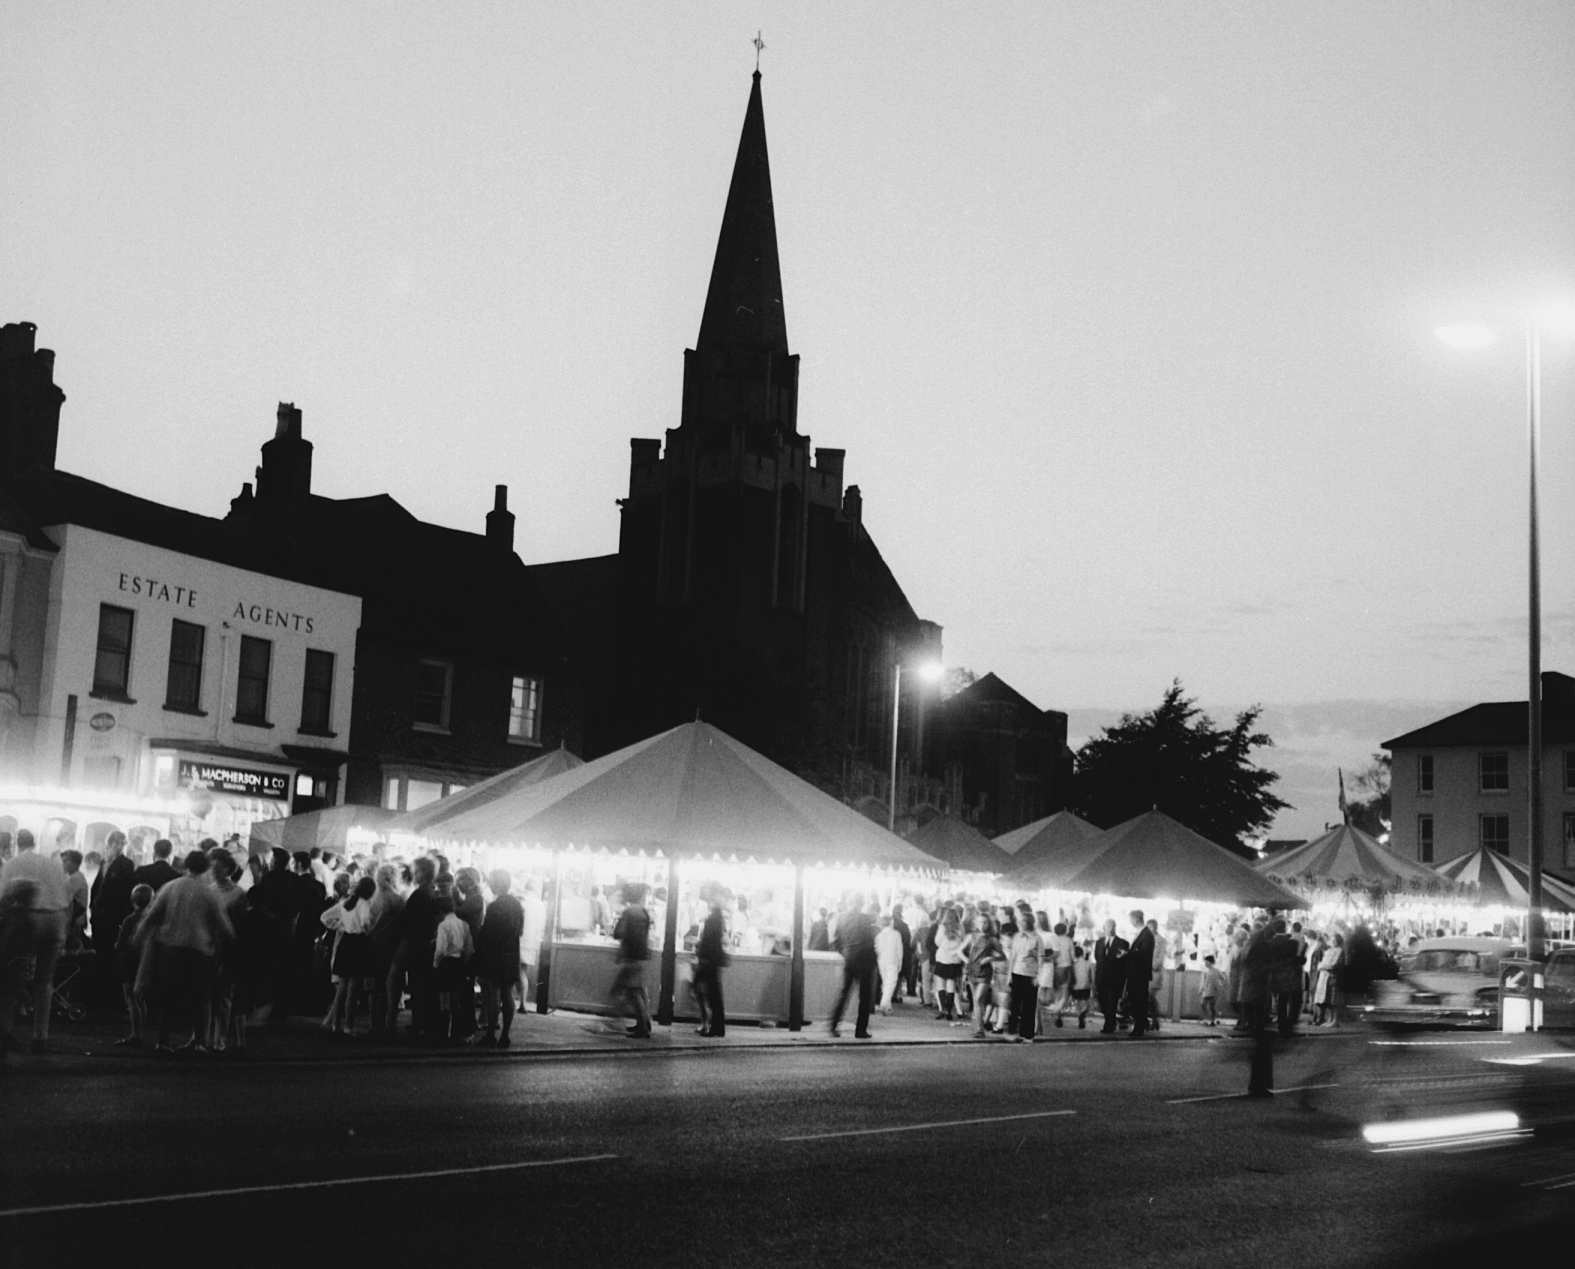 Stalls with lights at night with church shadow in background